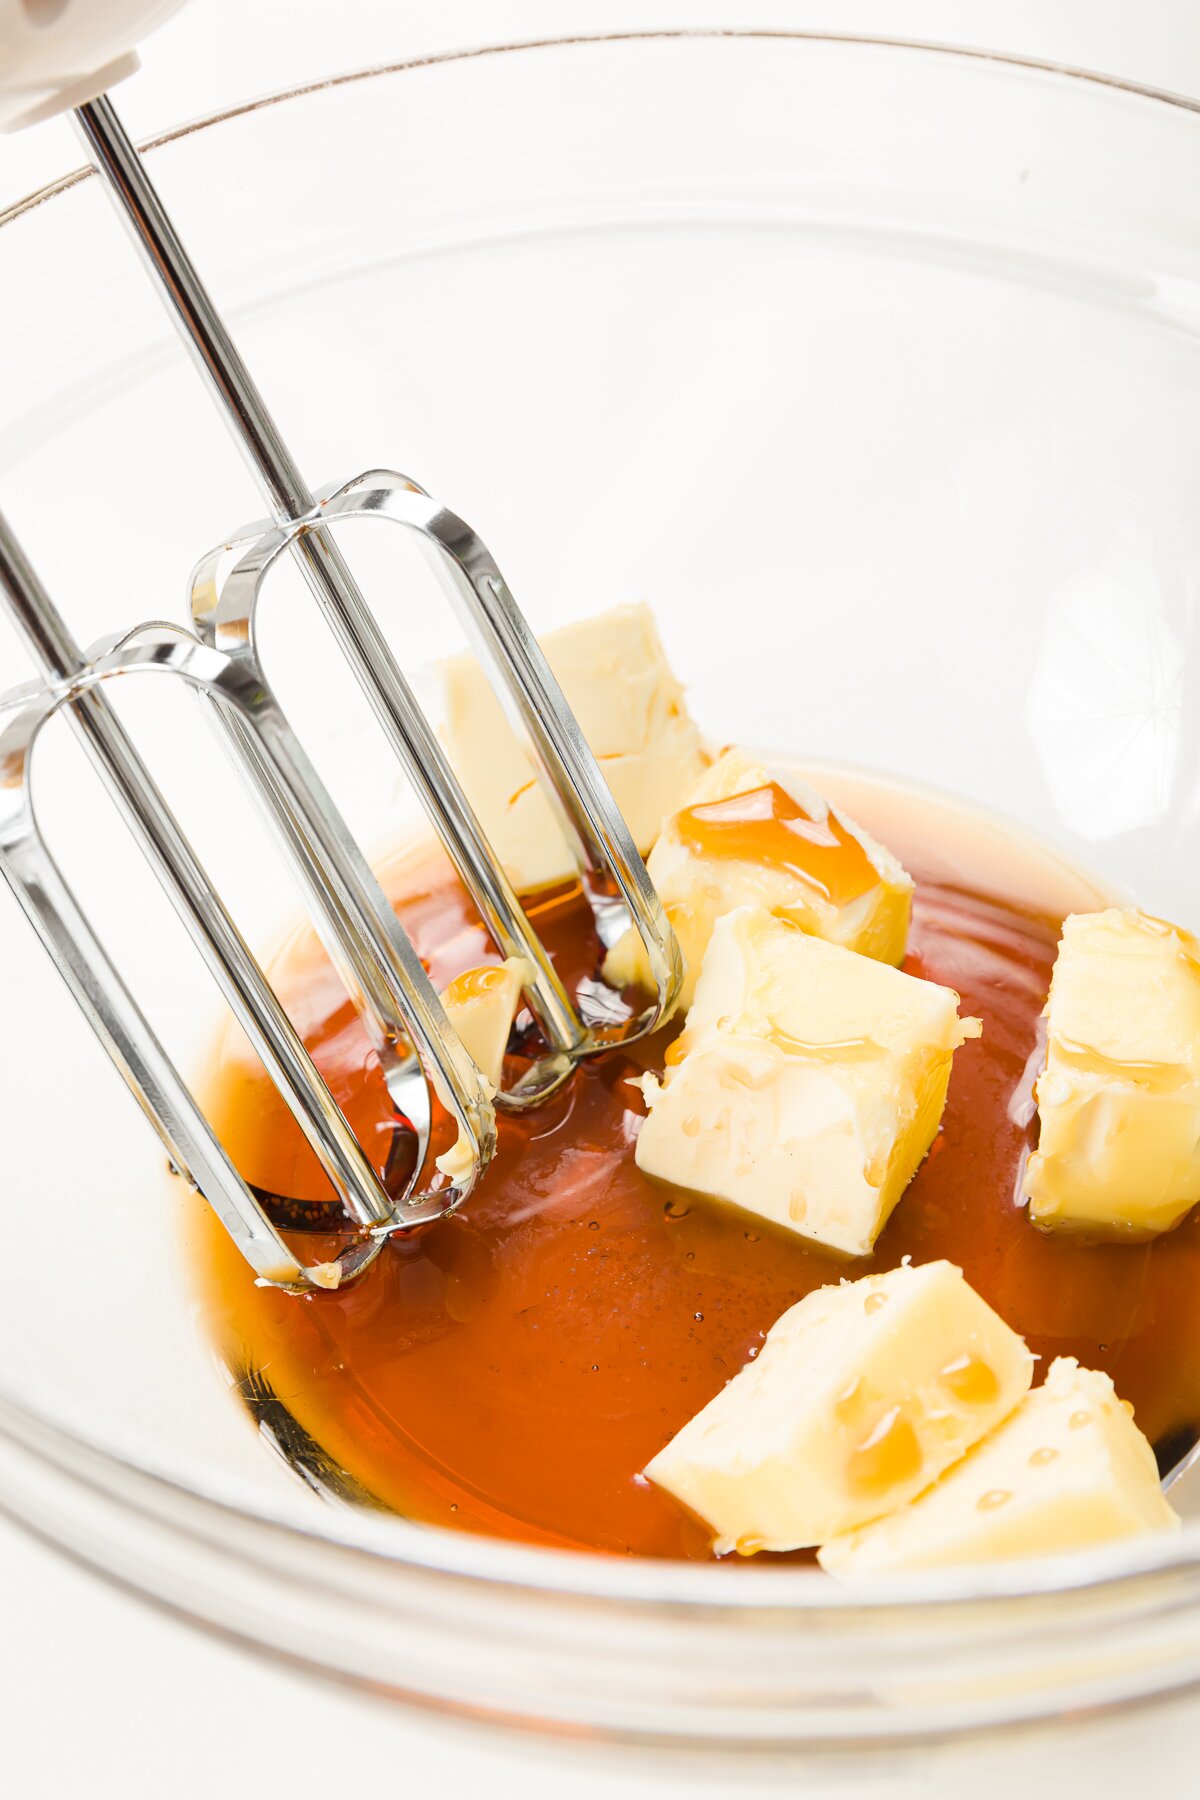 Maple and chunks of butter in a glass bowl with hand mixer blades